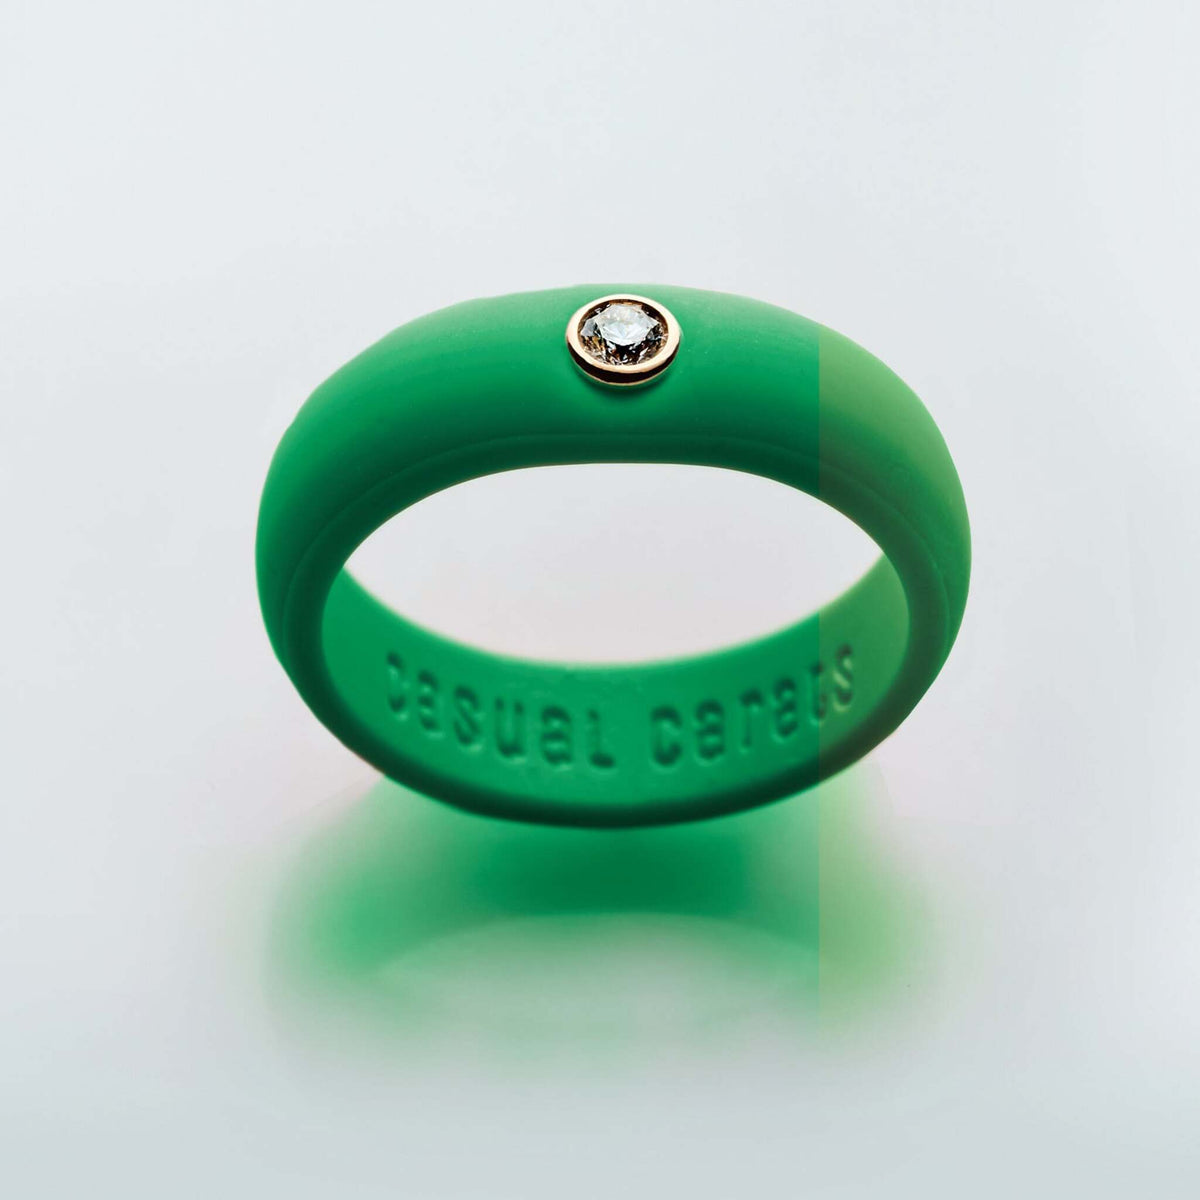 Casual Carats - Classic Collection - Kelly Green Silicone Ring with Diamond - Set in White or Yellow 14K Gold